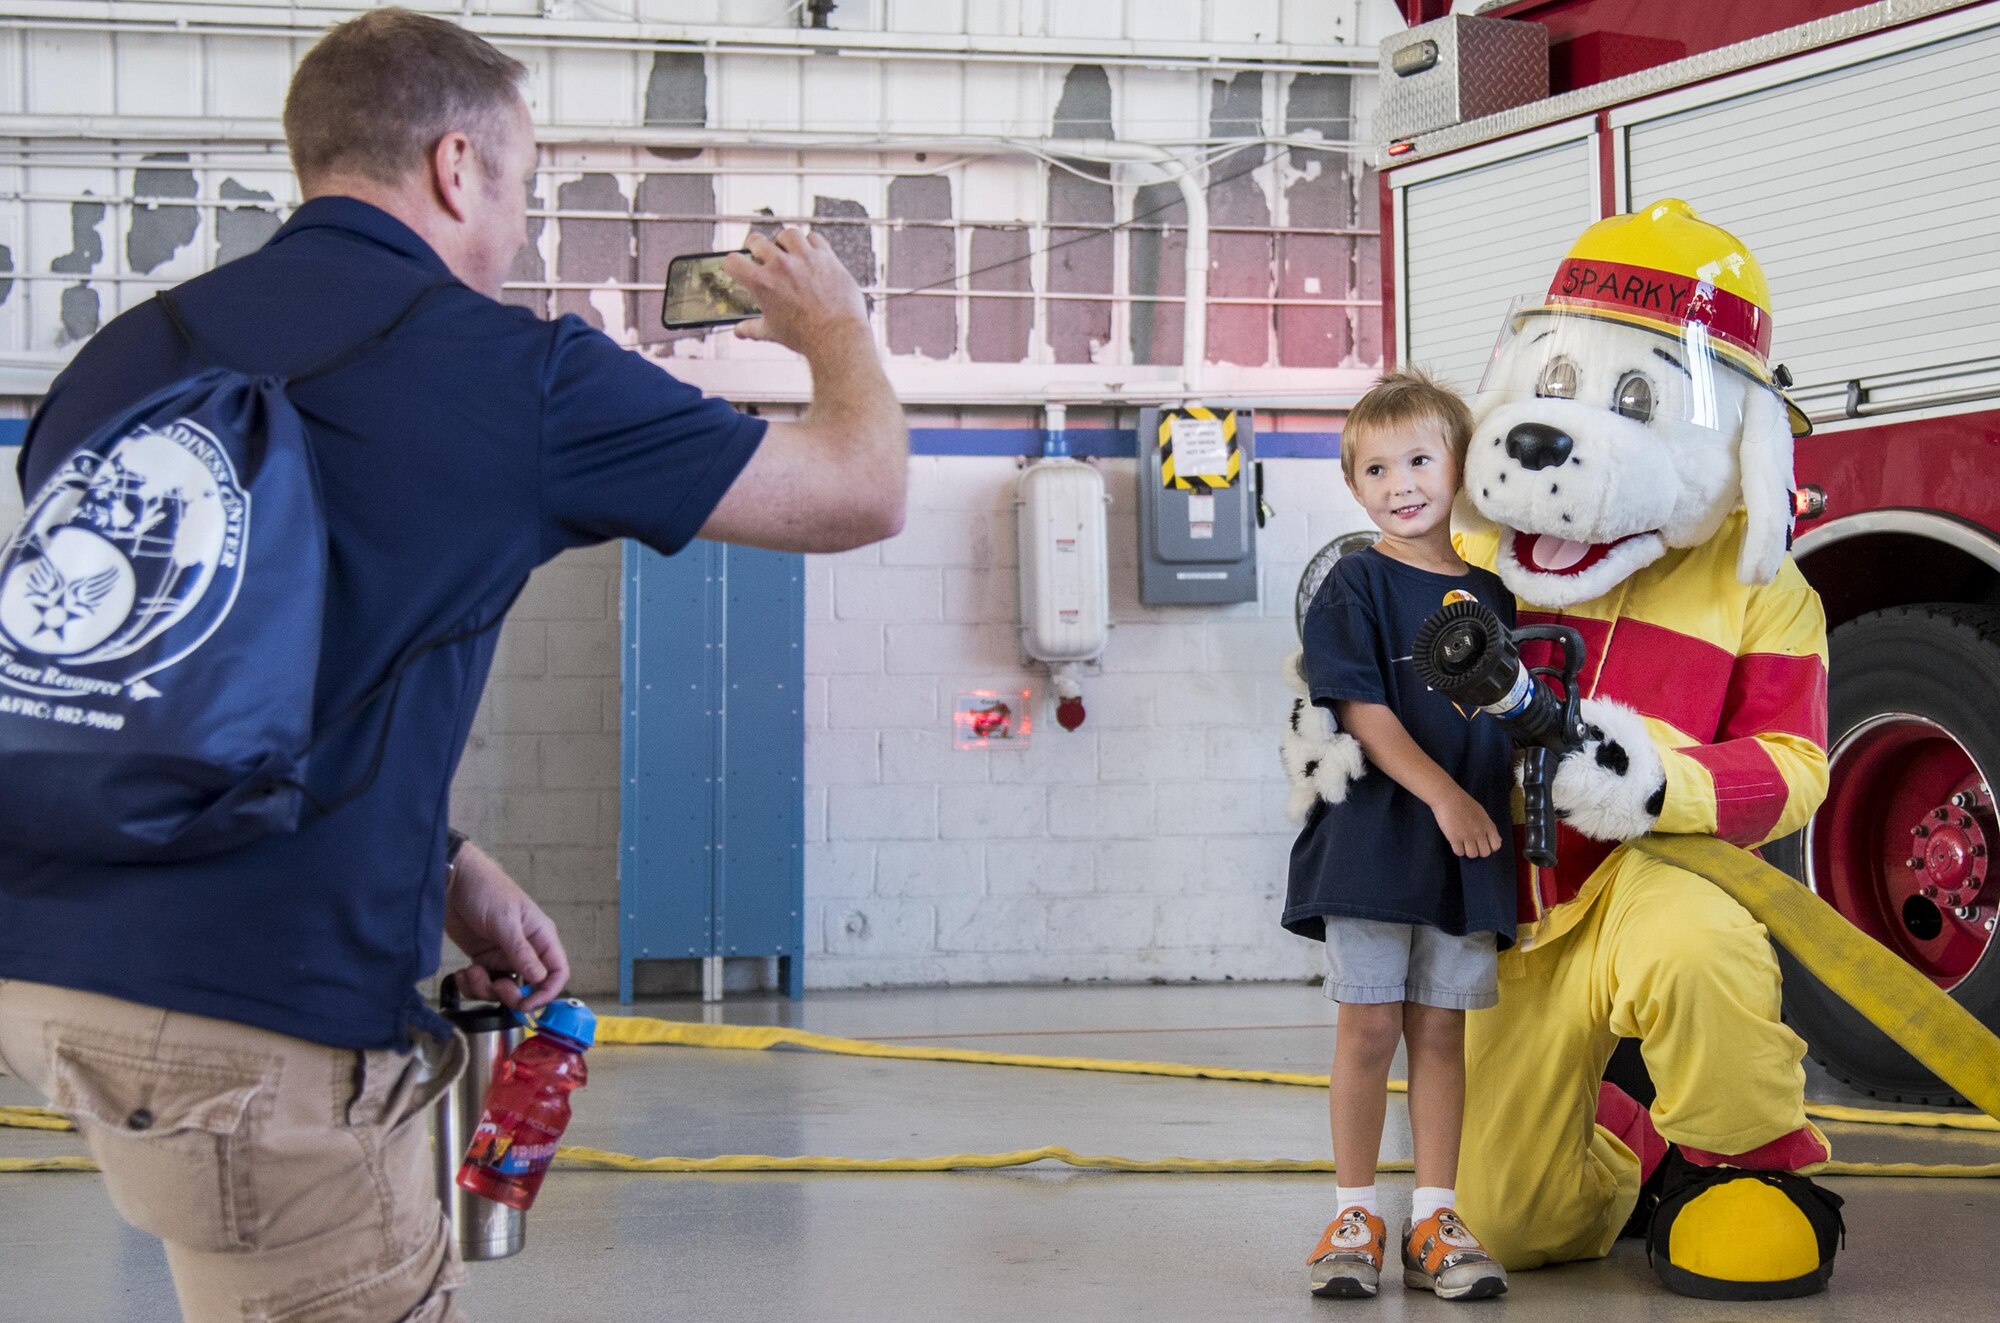 A proud father snaps a photo of his son with Sparky the Fire Dog during the Operation Hero event Oct. 22 at Eglin Air Force Base, Fla.  More than 100 kids participated in the mock deployment experience created to give military children a glimpse of what their loved ones go through when they leave home. The kids went through a deployment line to get their dog tags and “immunizations” before they were briefed by the commander and shipped off to a deployed location. There, they participated in various activities and demonstrations by local base agencies. (U.S. Air Force photo/Samuel King Jr.)